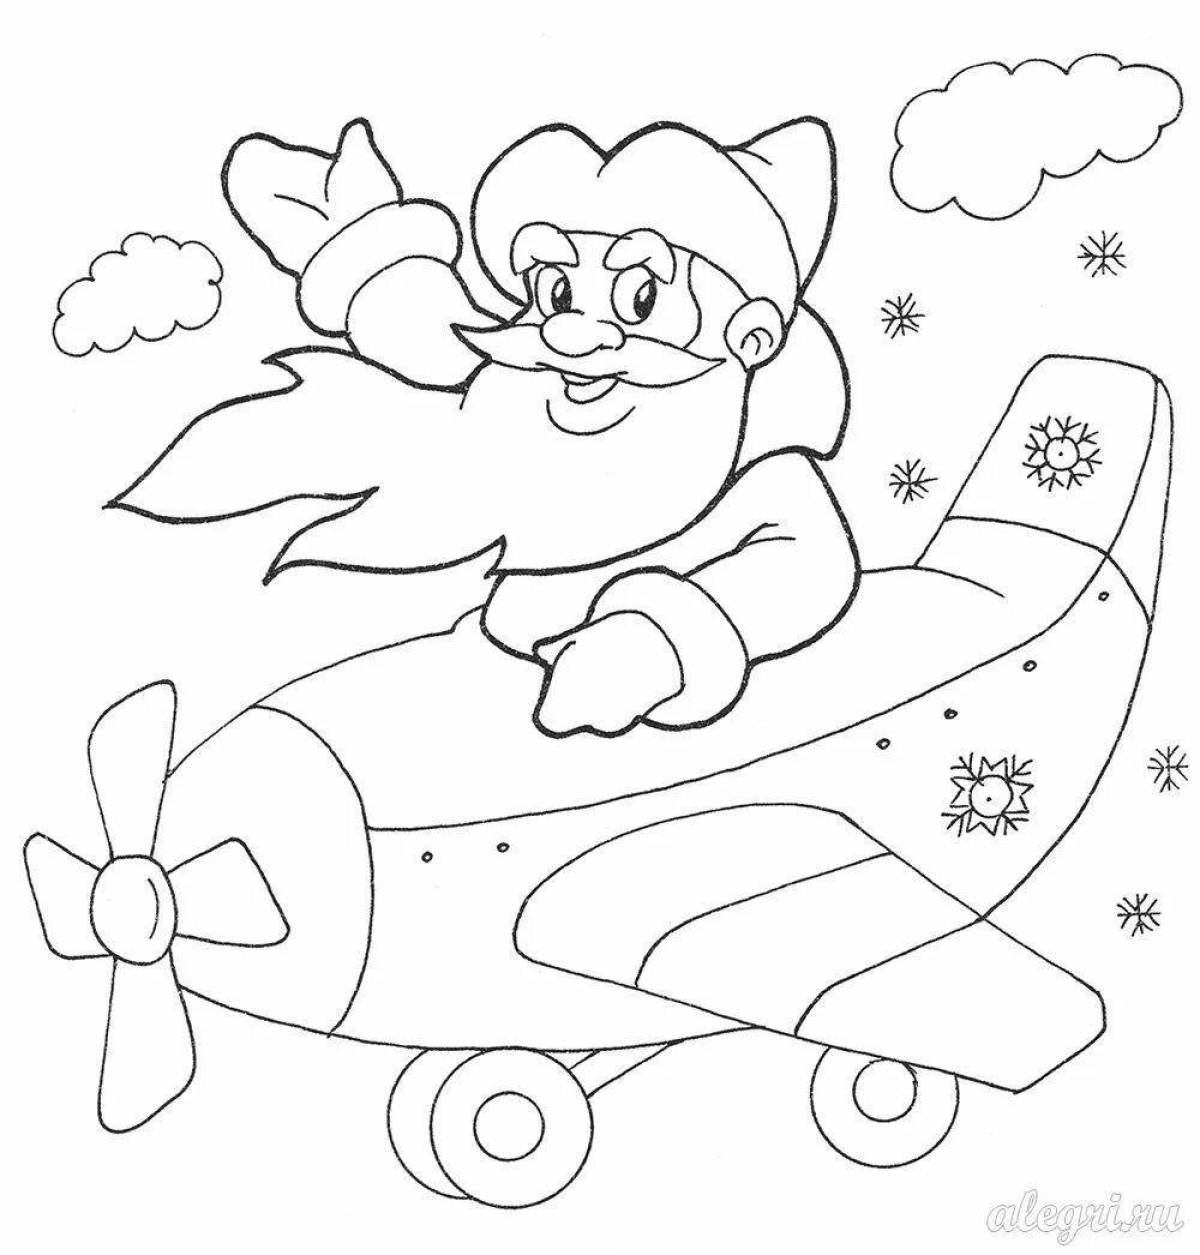 Joyful Christmas coloring book for children 6-7 years old